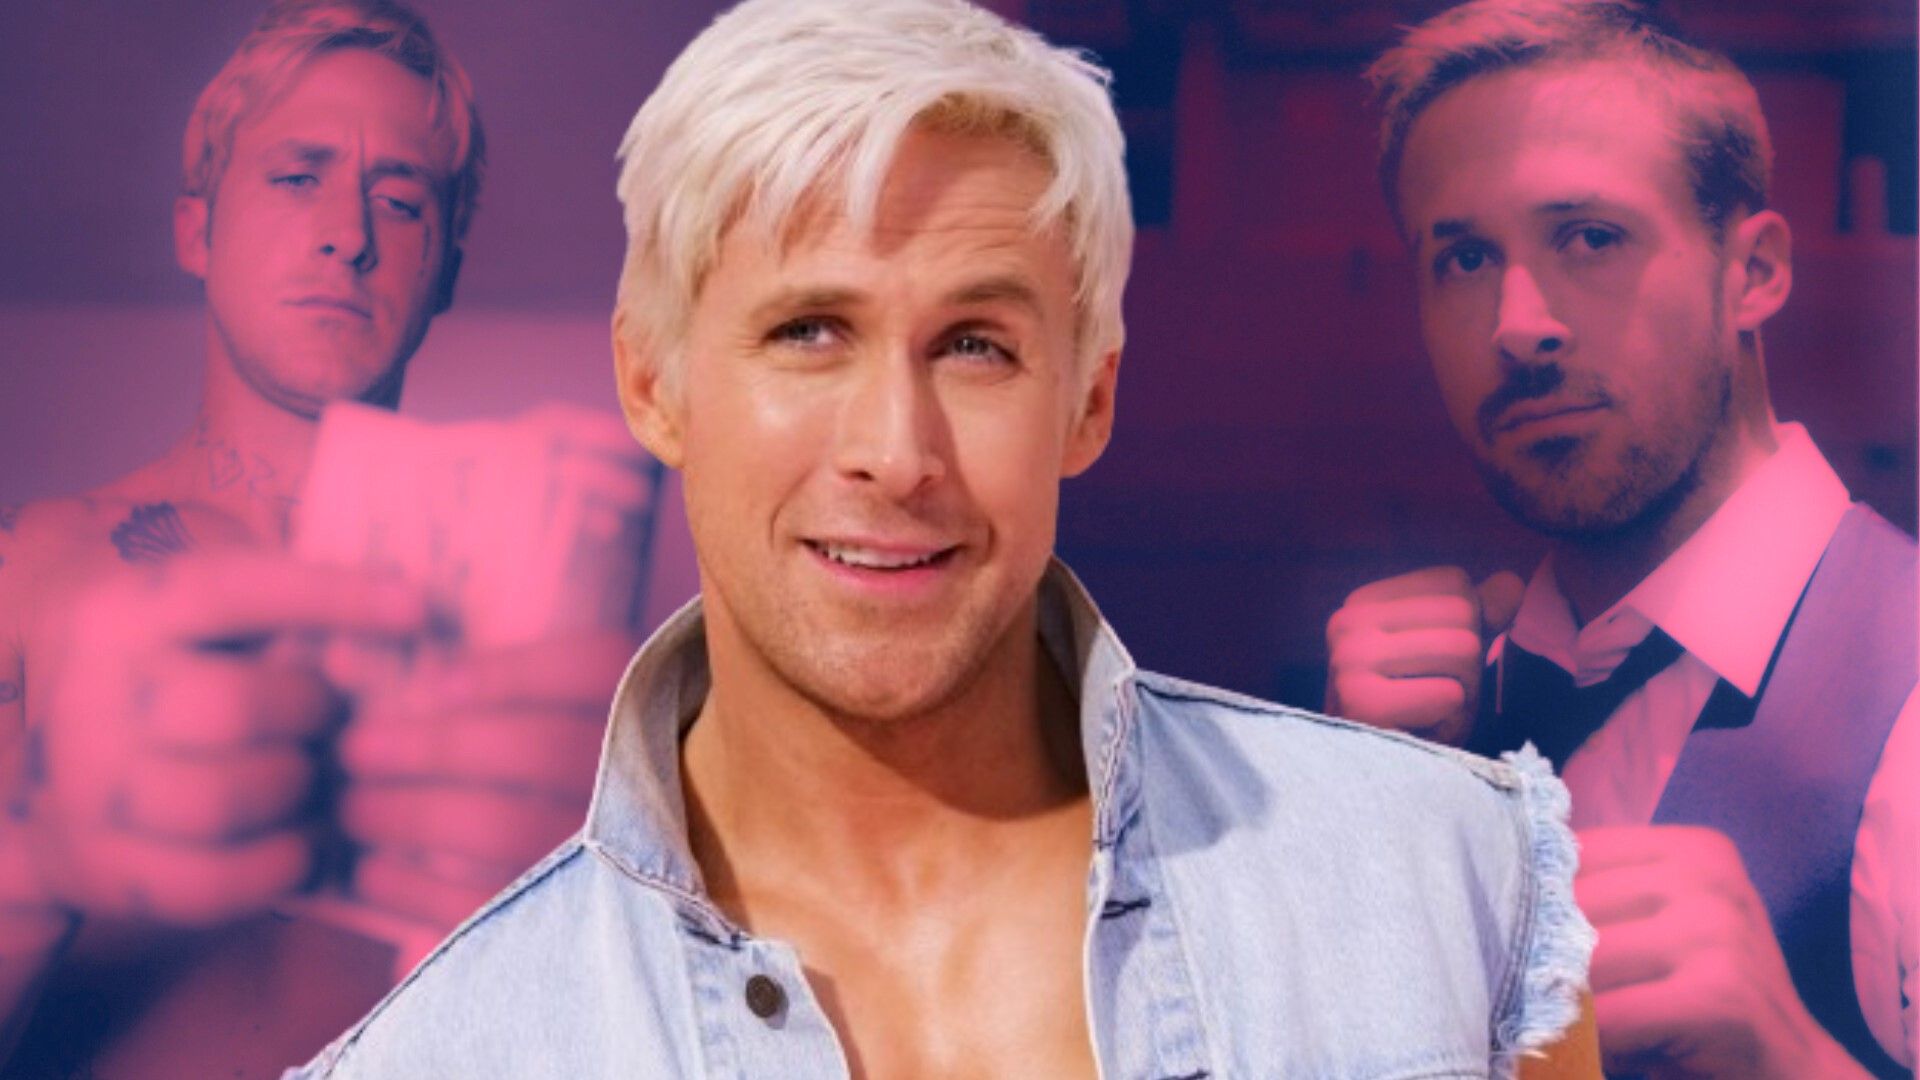 Ryan Gosling as Ken and in darker roles The Place Beyond the Pines & Only God Forgives.